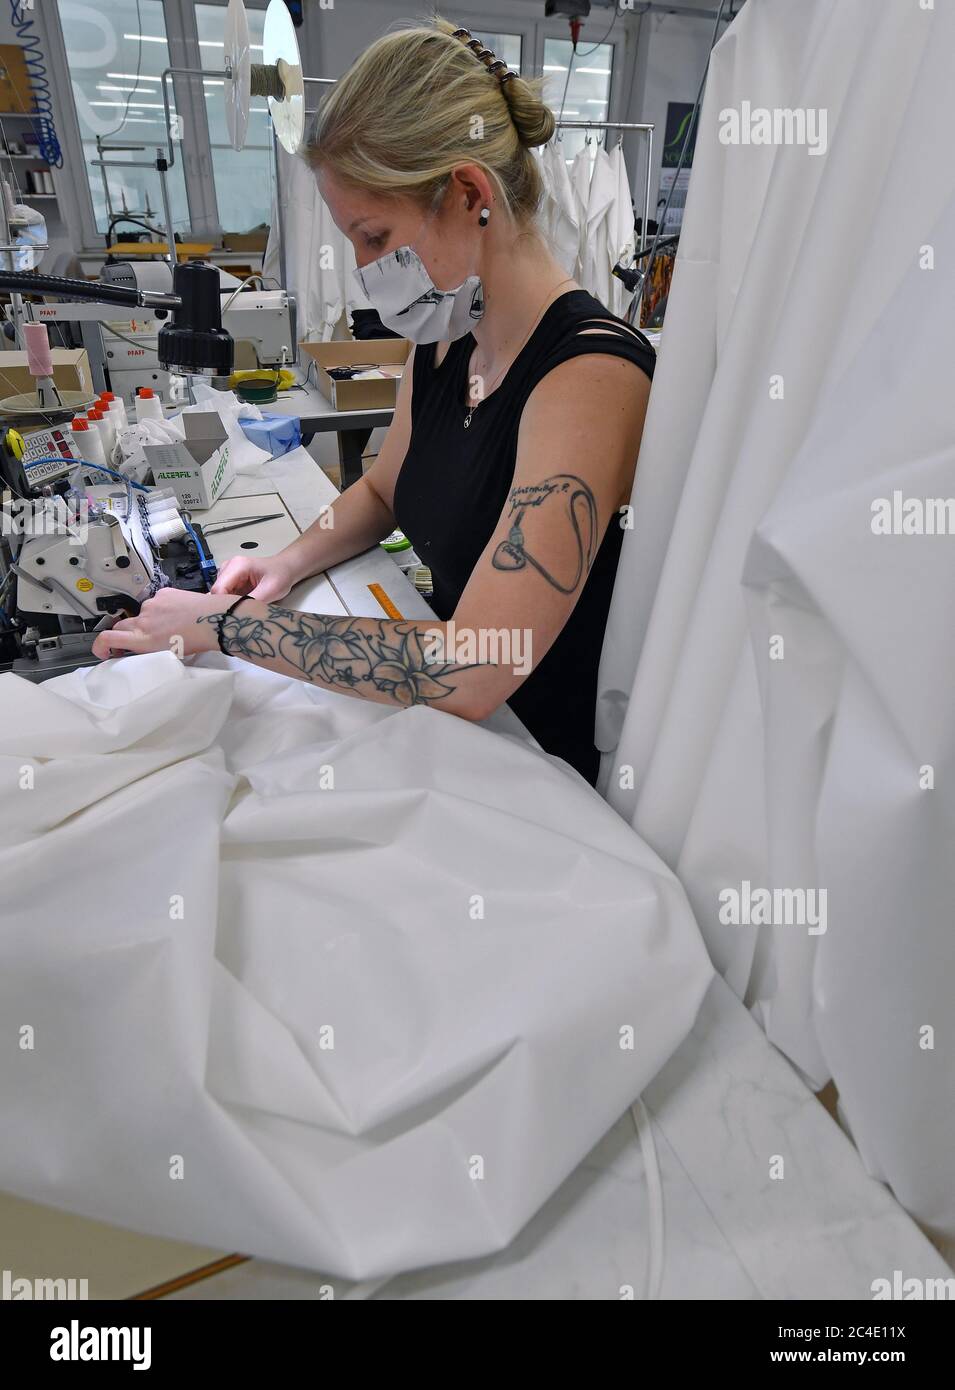 26 June 2020, Saxony, Schreiersgrün: Seamstress Anja Jahnsmüller makes  protective clothing in the sewing room of Seidel Moden. The Saxon textile  and clothing industry is campaigning for authorities and institutions to  rely